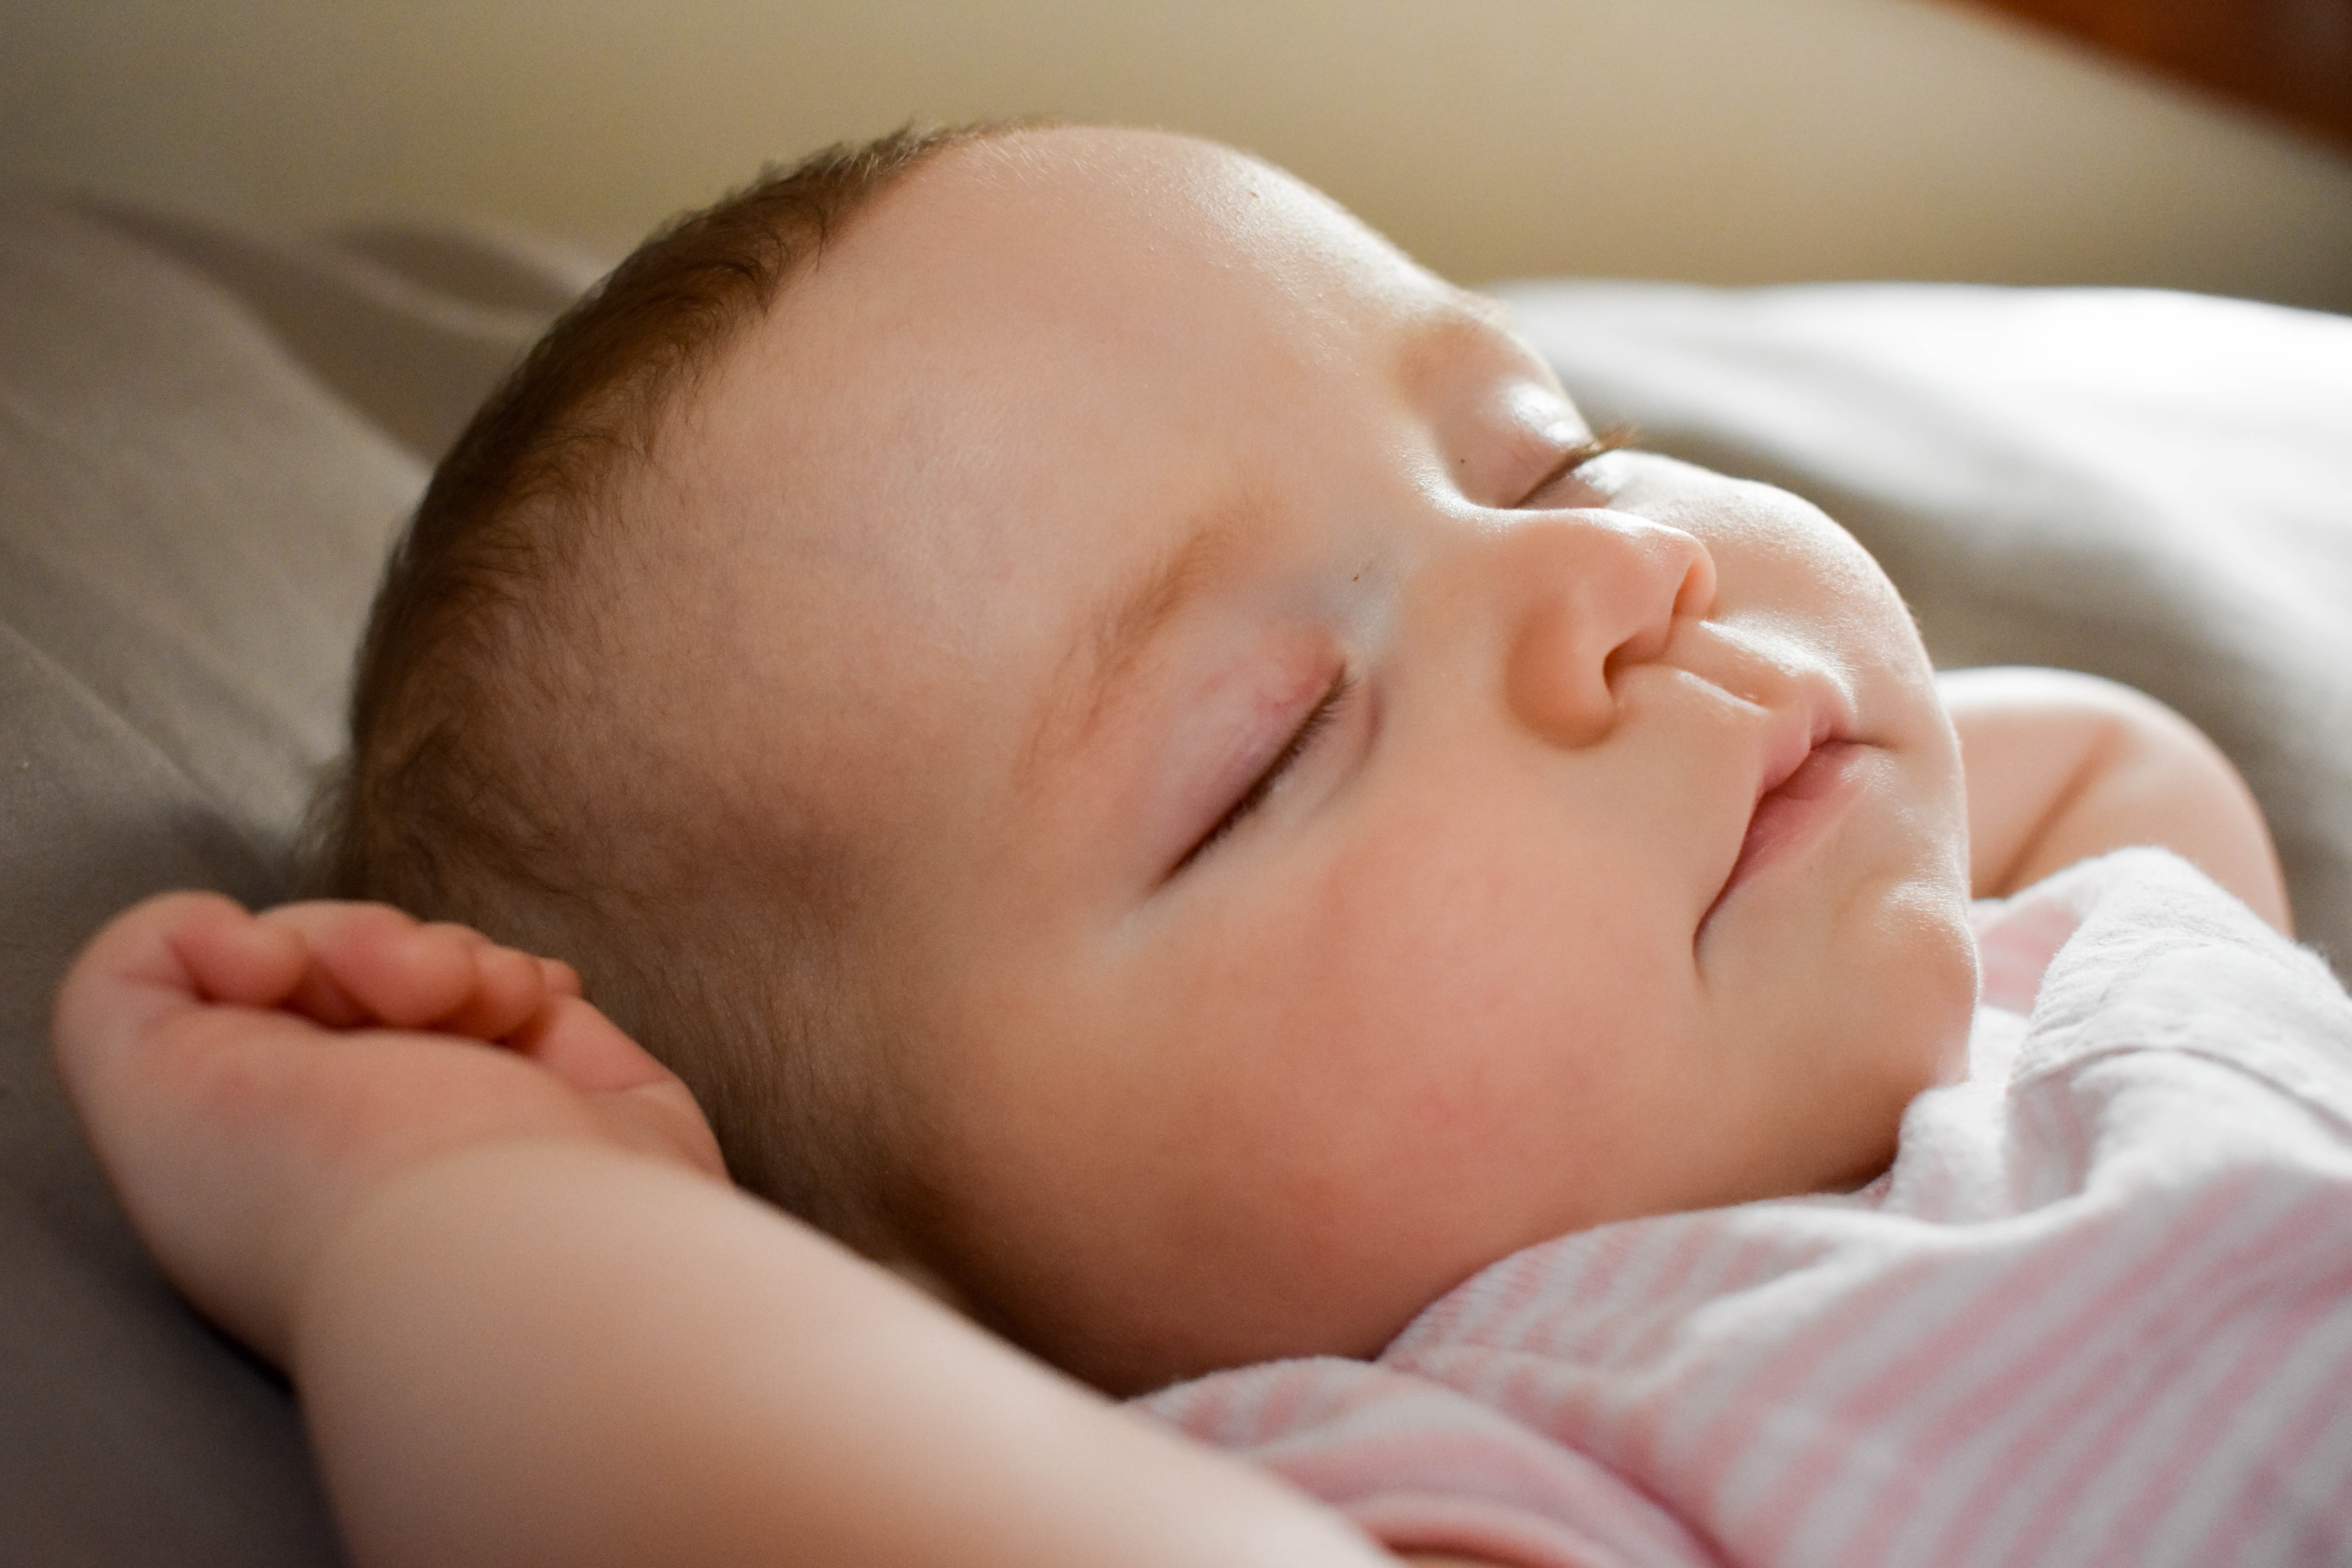 The sleep routine for your child should be realistic for your family.